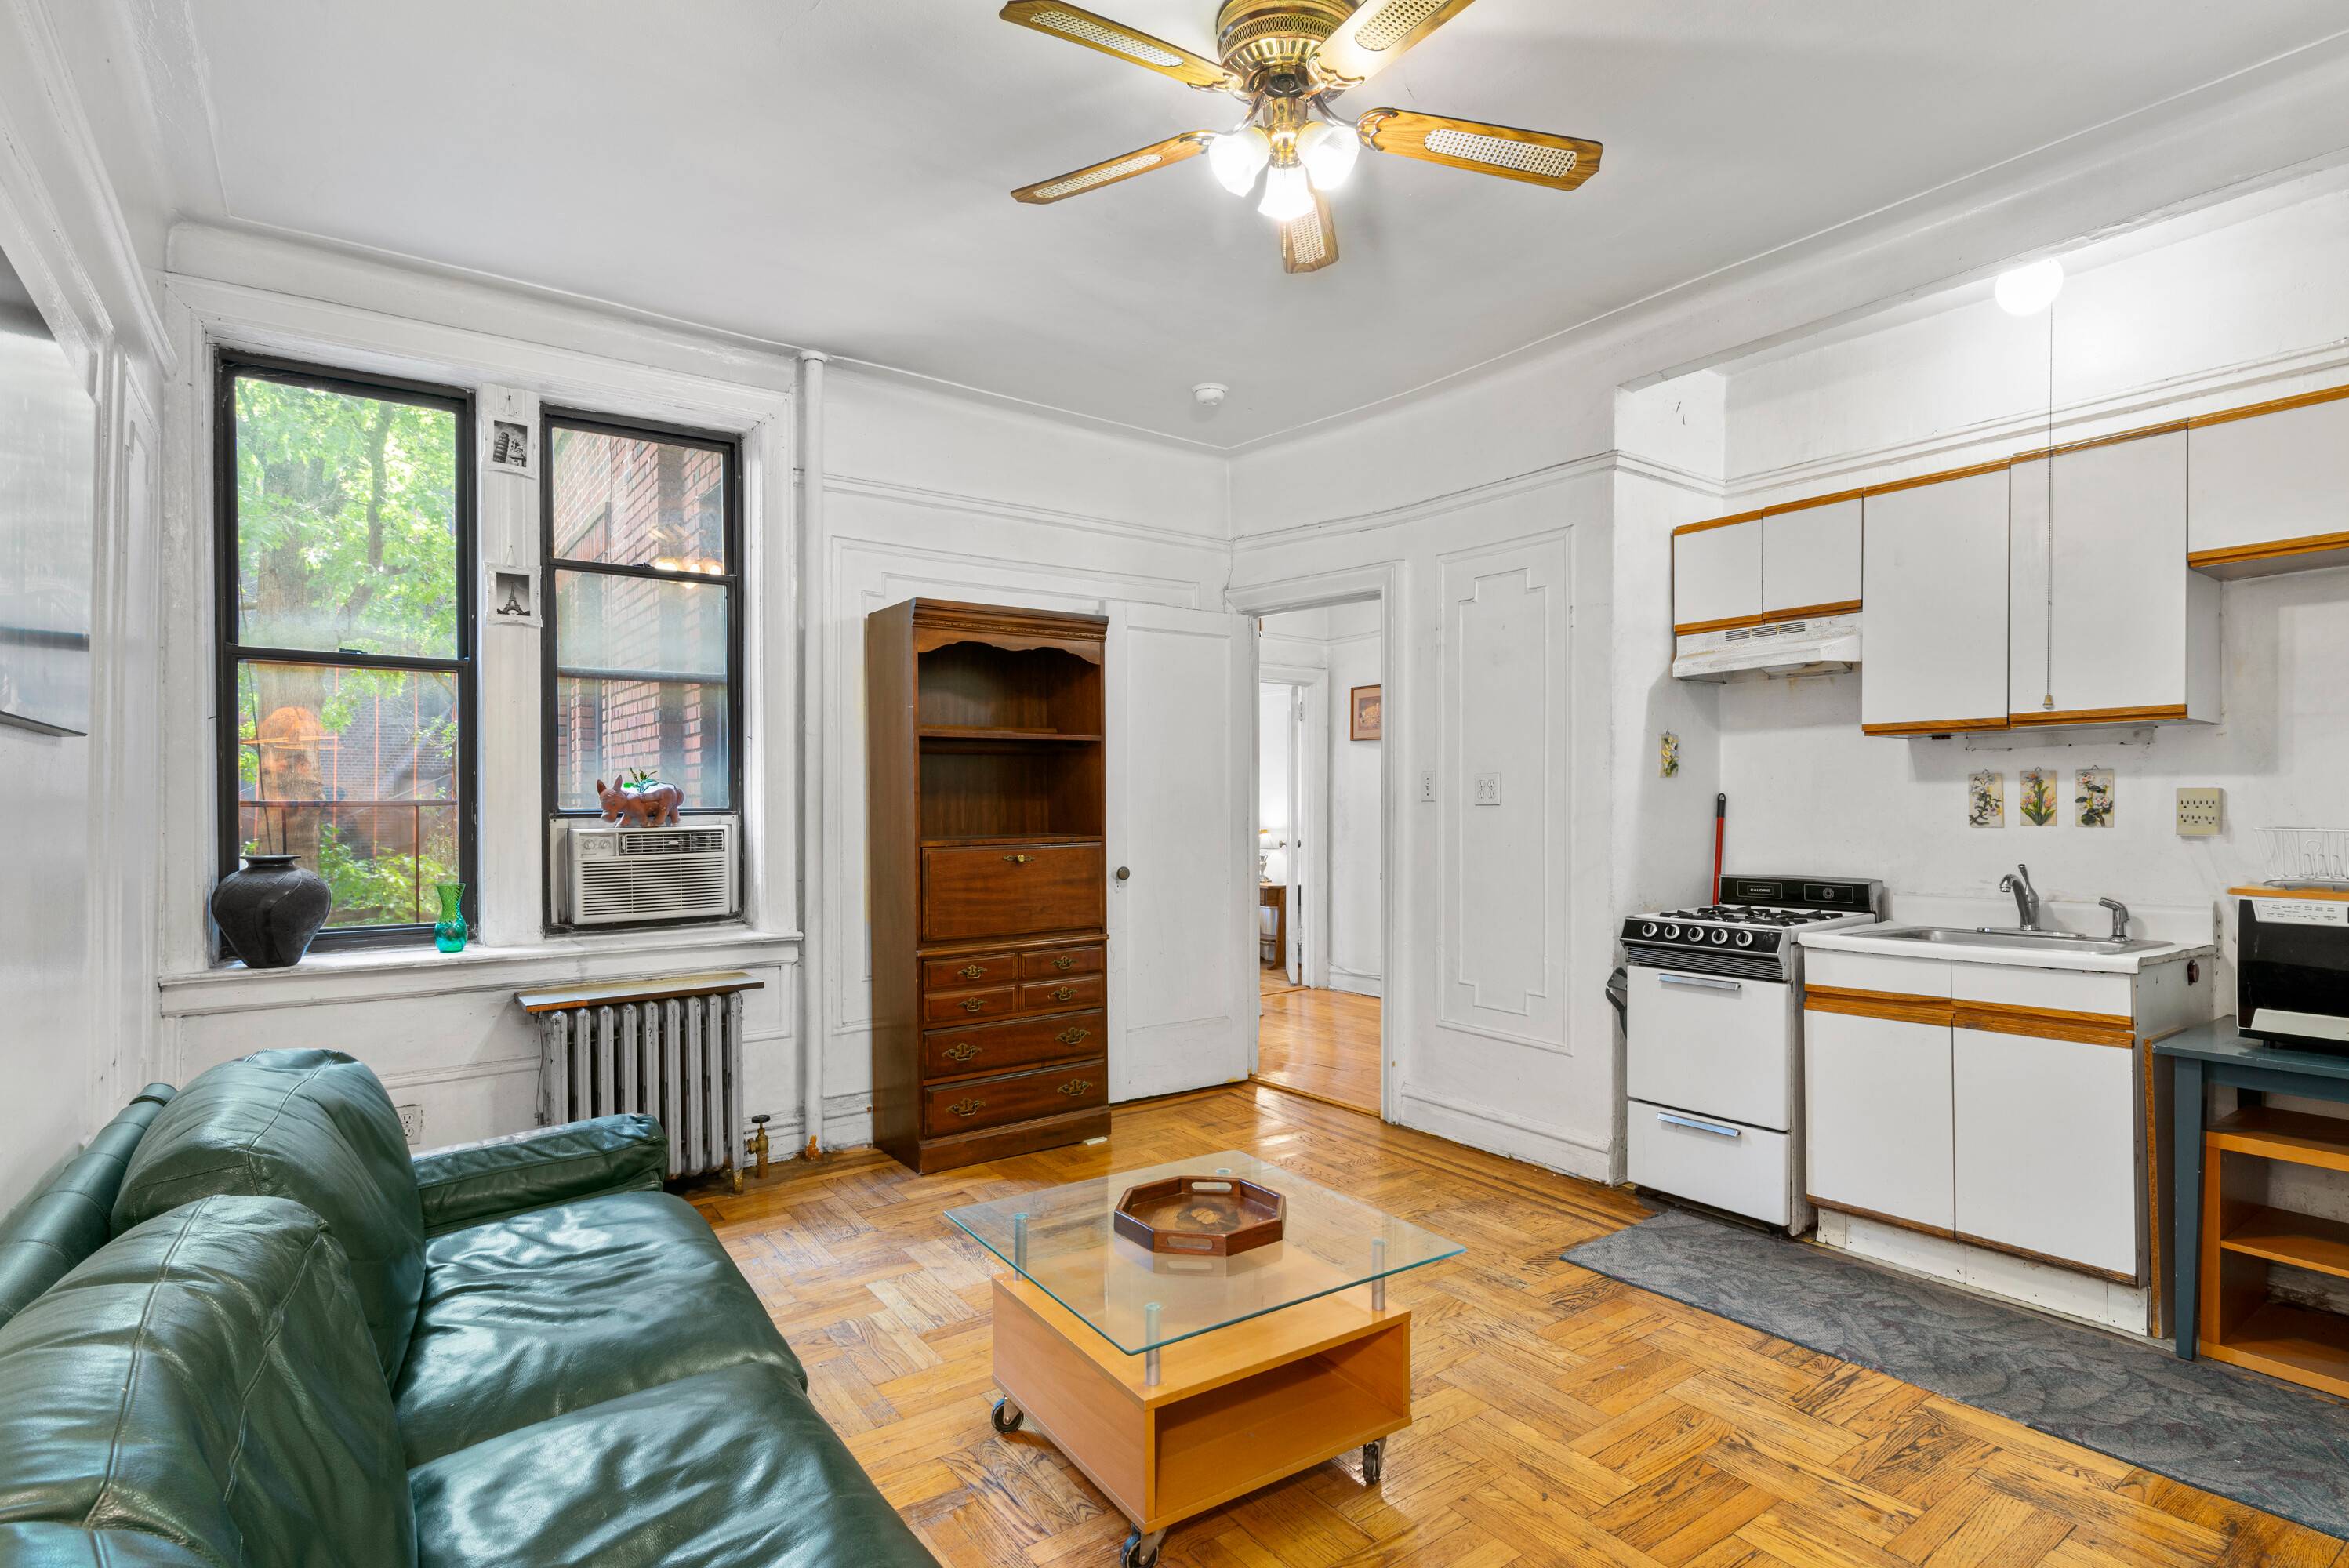 Peaceful and Lovely 1 BR Layout! Renovate and design this potential gem!